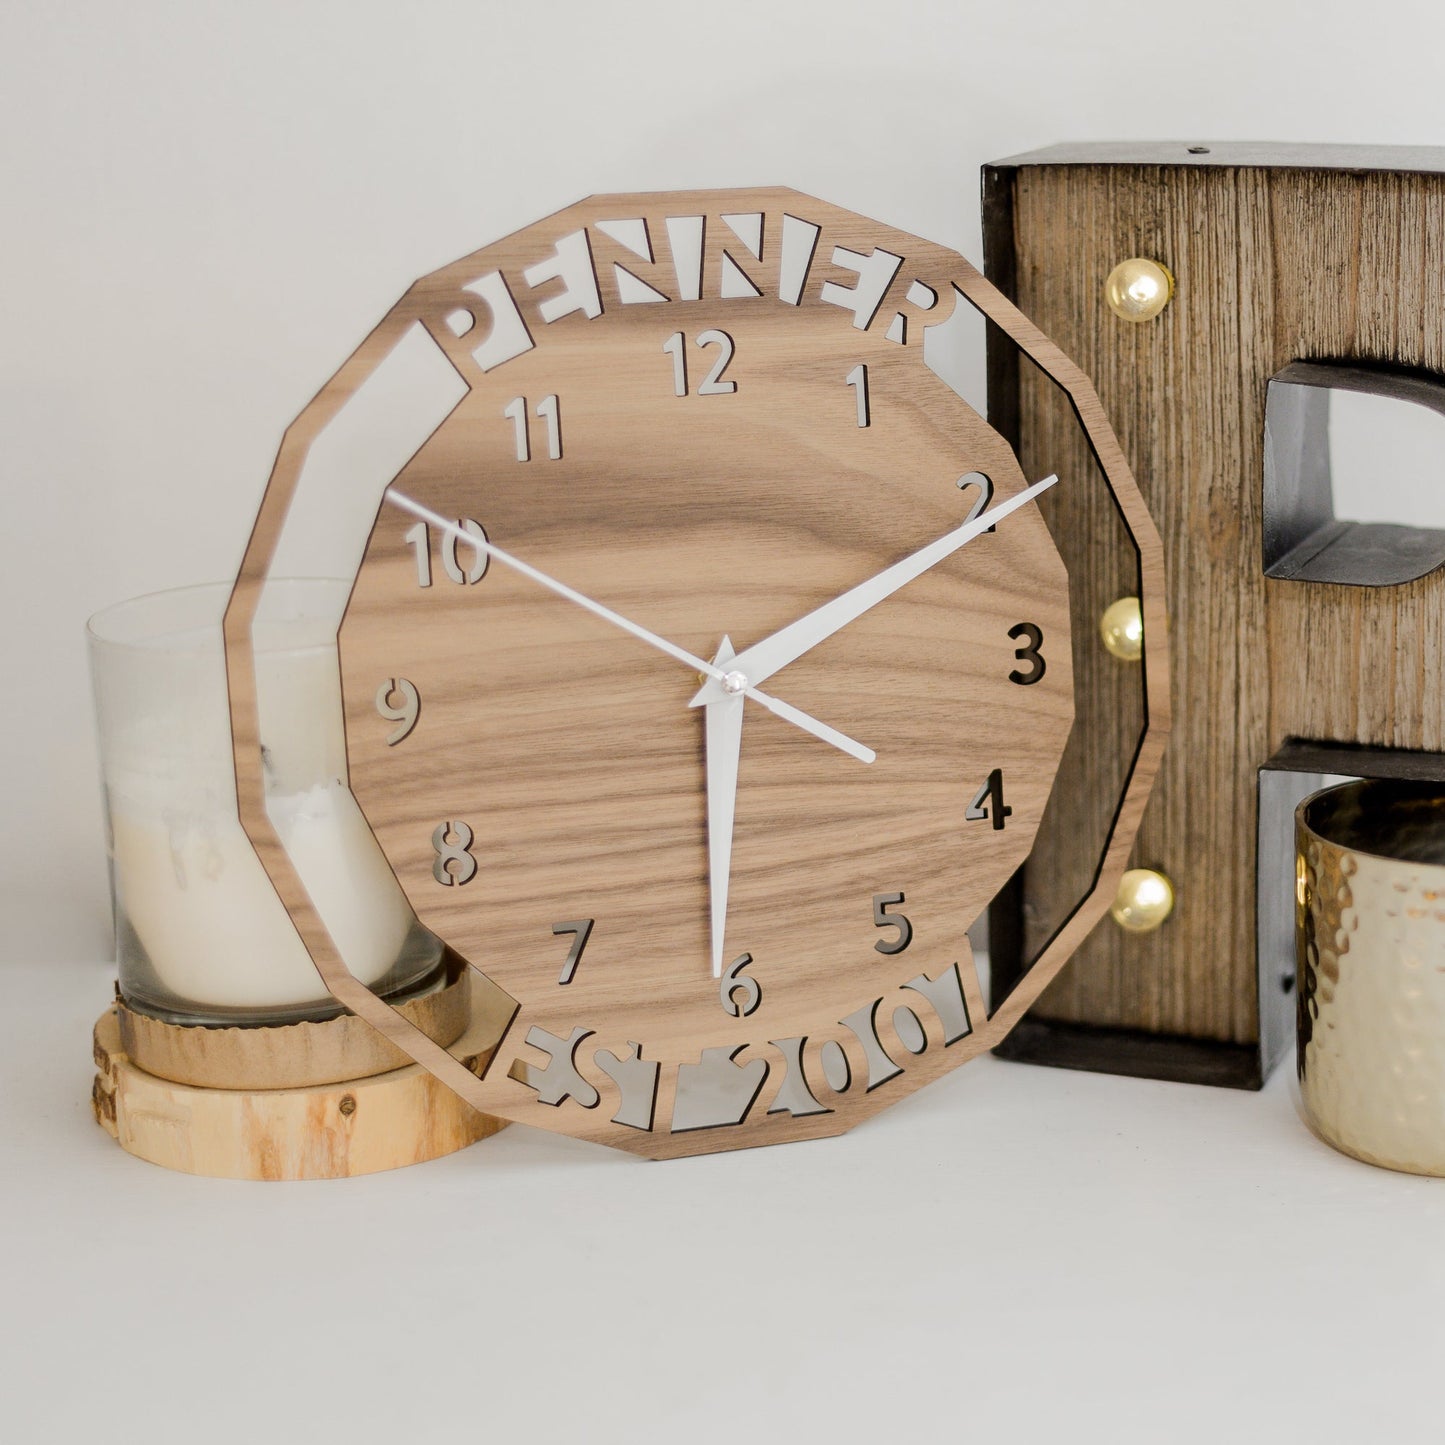 Personalized Wood Wall Clock - personalized clock for anniversary in walnut wood - by LeeMo Designs in Bend, Oregon